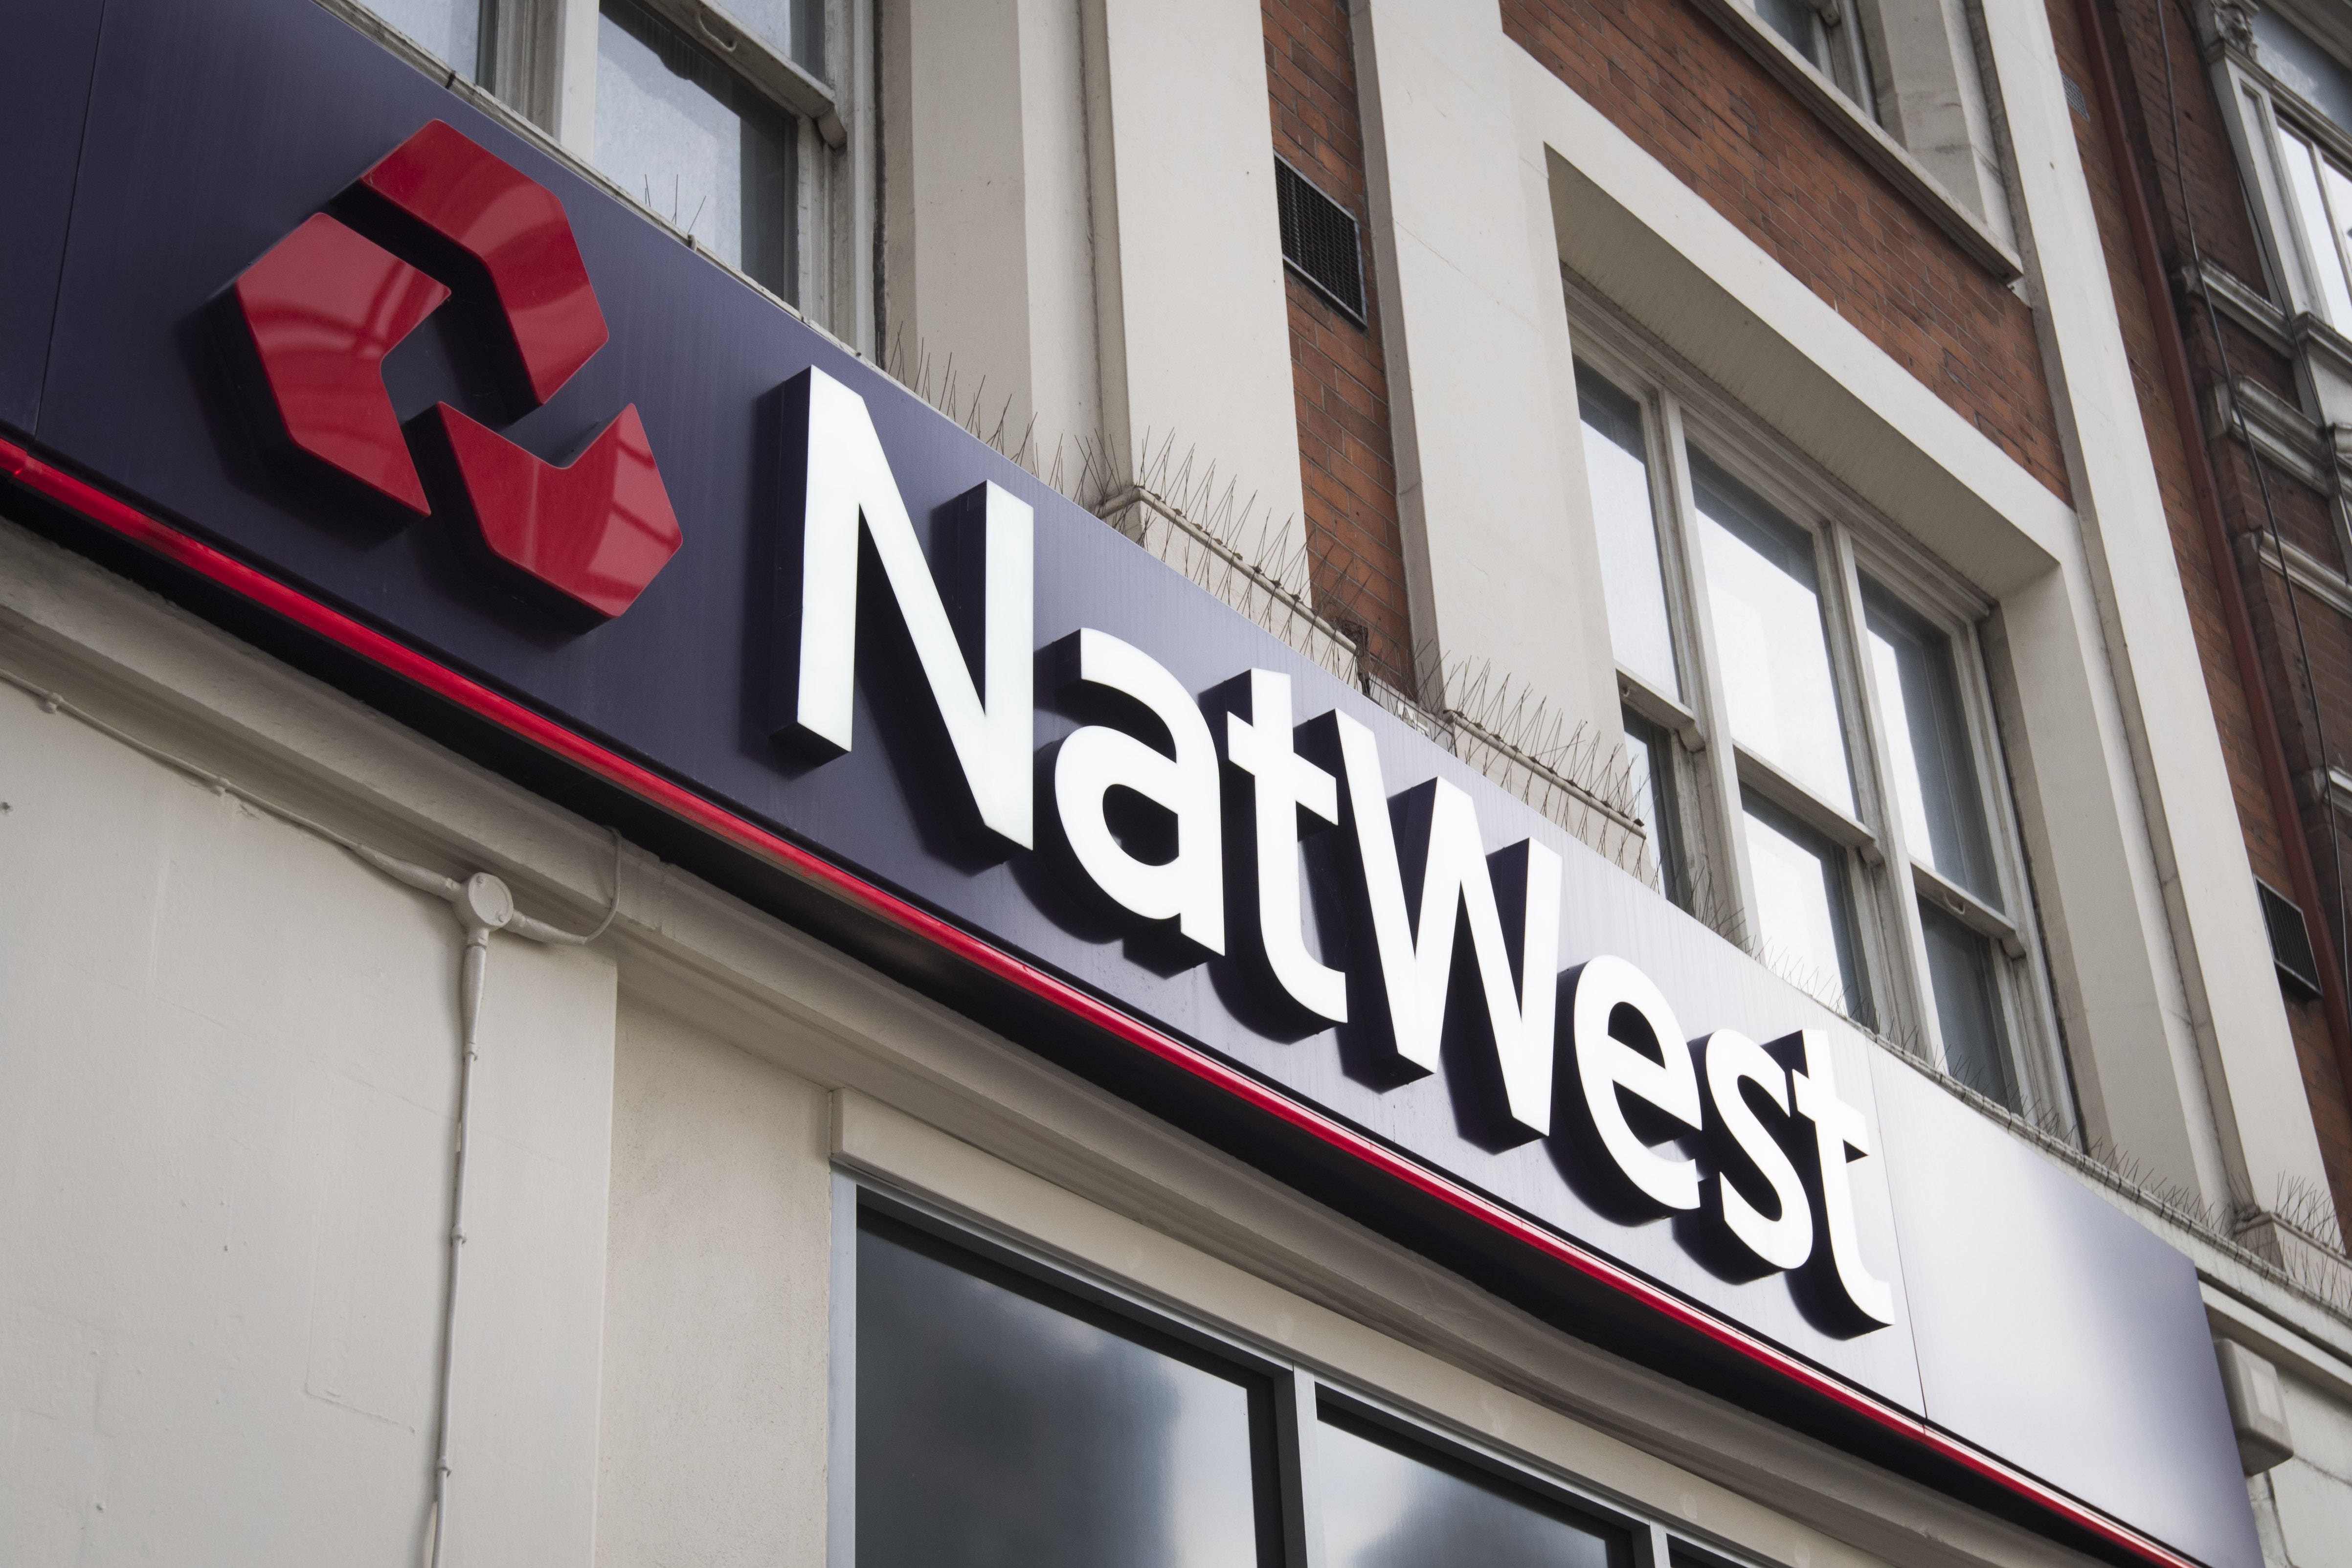 NatWest chief executive Dame Alison Rose has said UK households and businesses are becoming more confident despite ongoing pressures from higher interest rates and the cost of living crisis (PA)